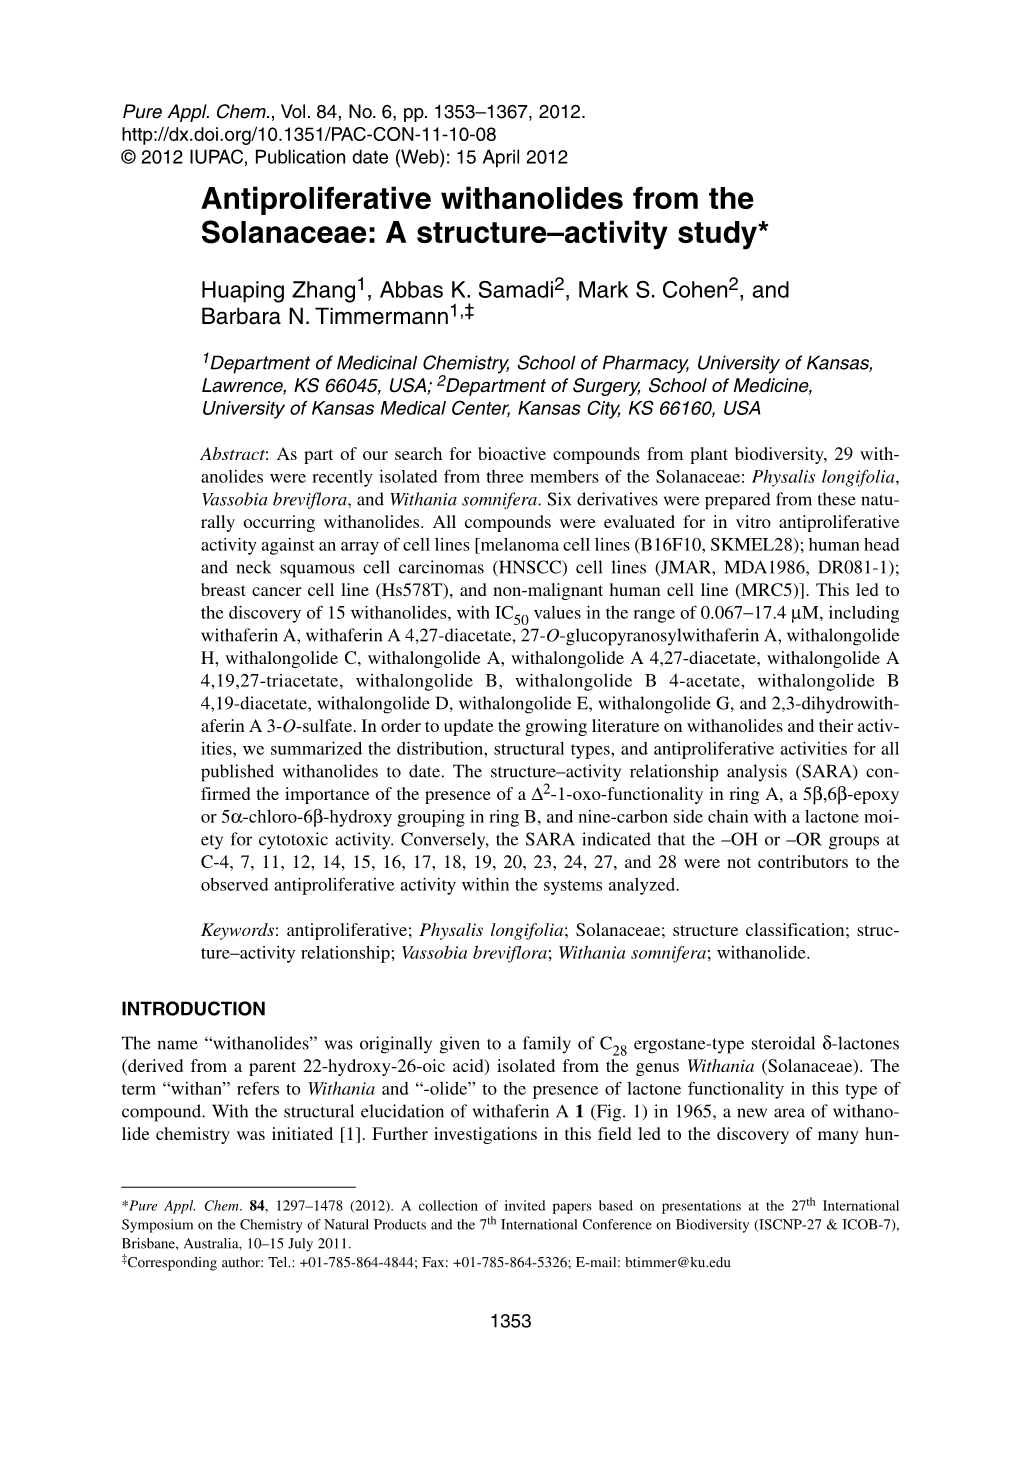 Antiproliferative Withanolides from the Solanaceae: a Structure–Activity Study*